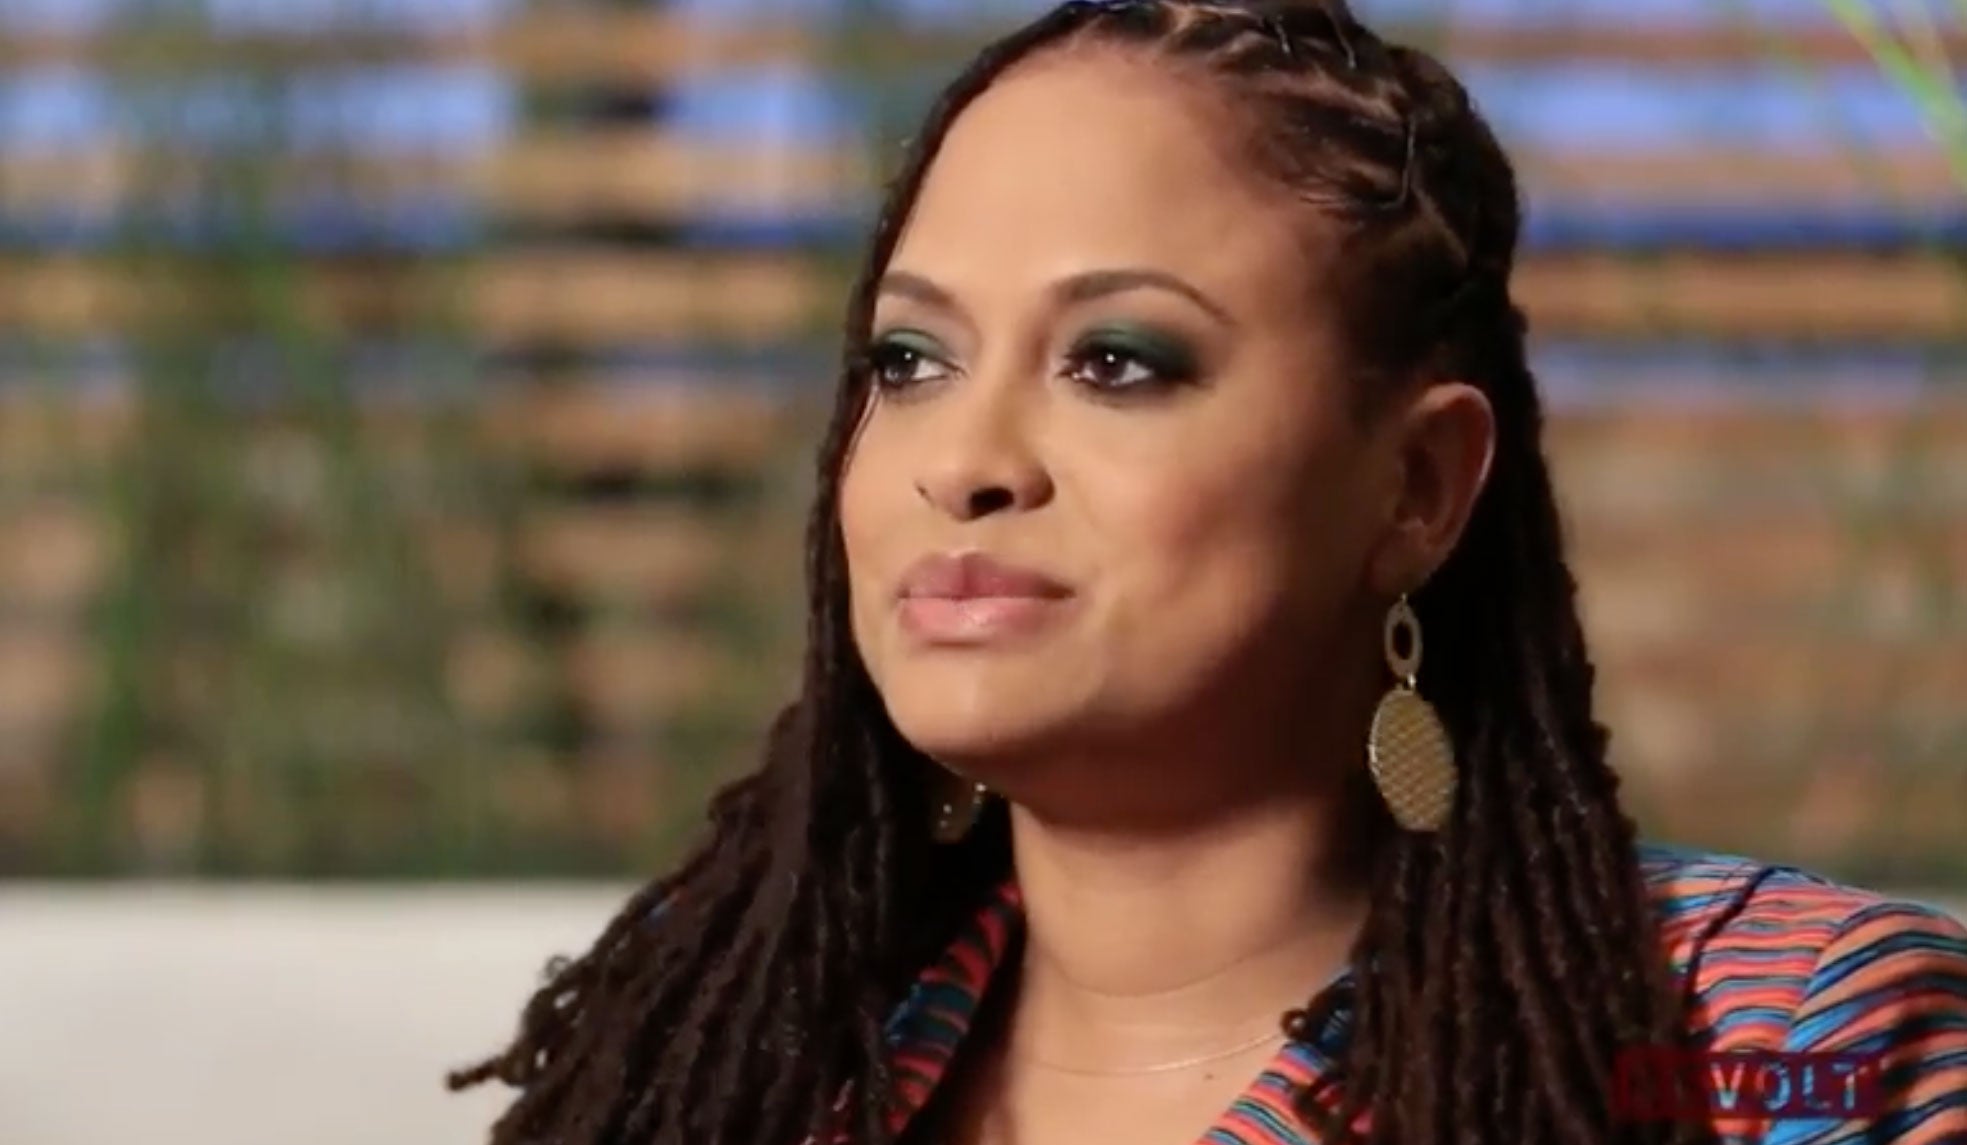 Ava DuVernay Shares Why Oprah Is An Inspiration
